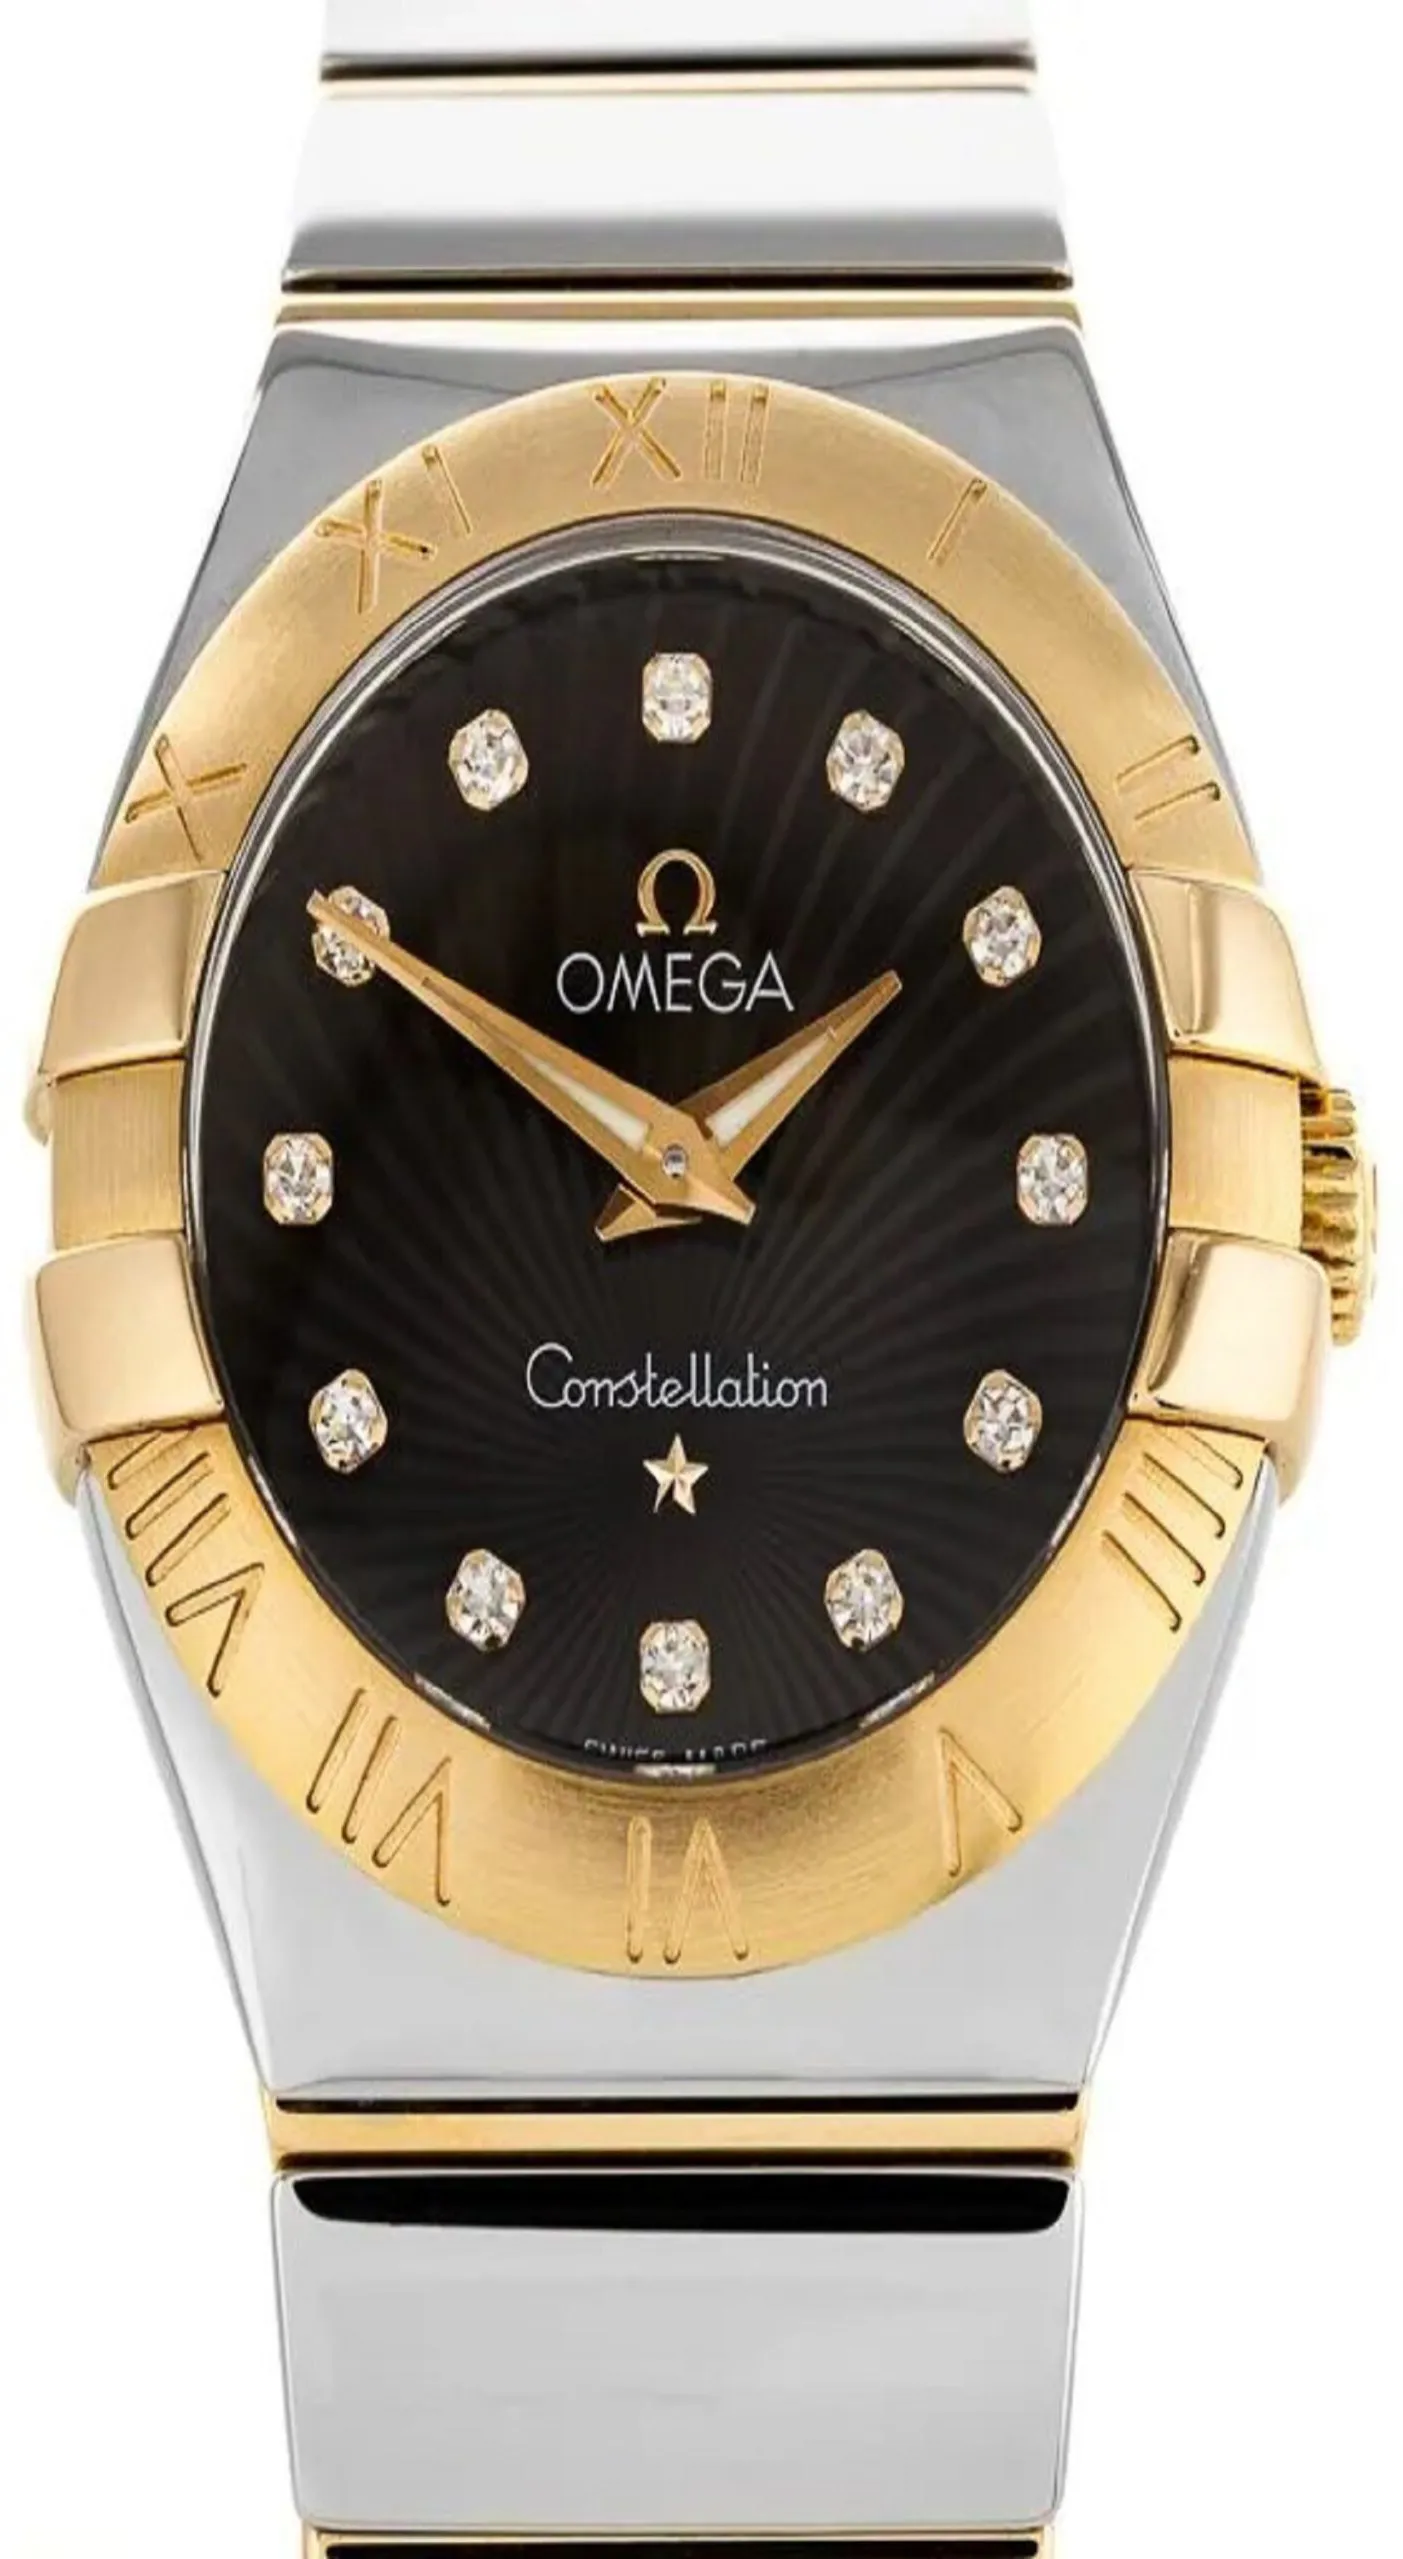 Omega Constellation 123.20.27.60.63.002 27mm Stainless steel and rose gold Brown